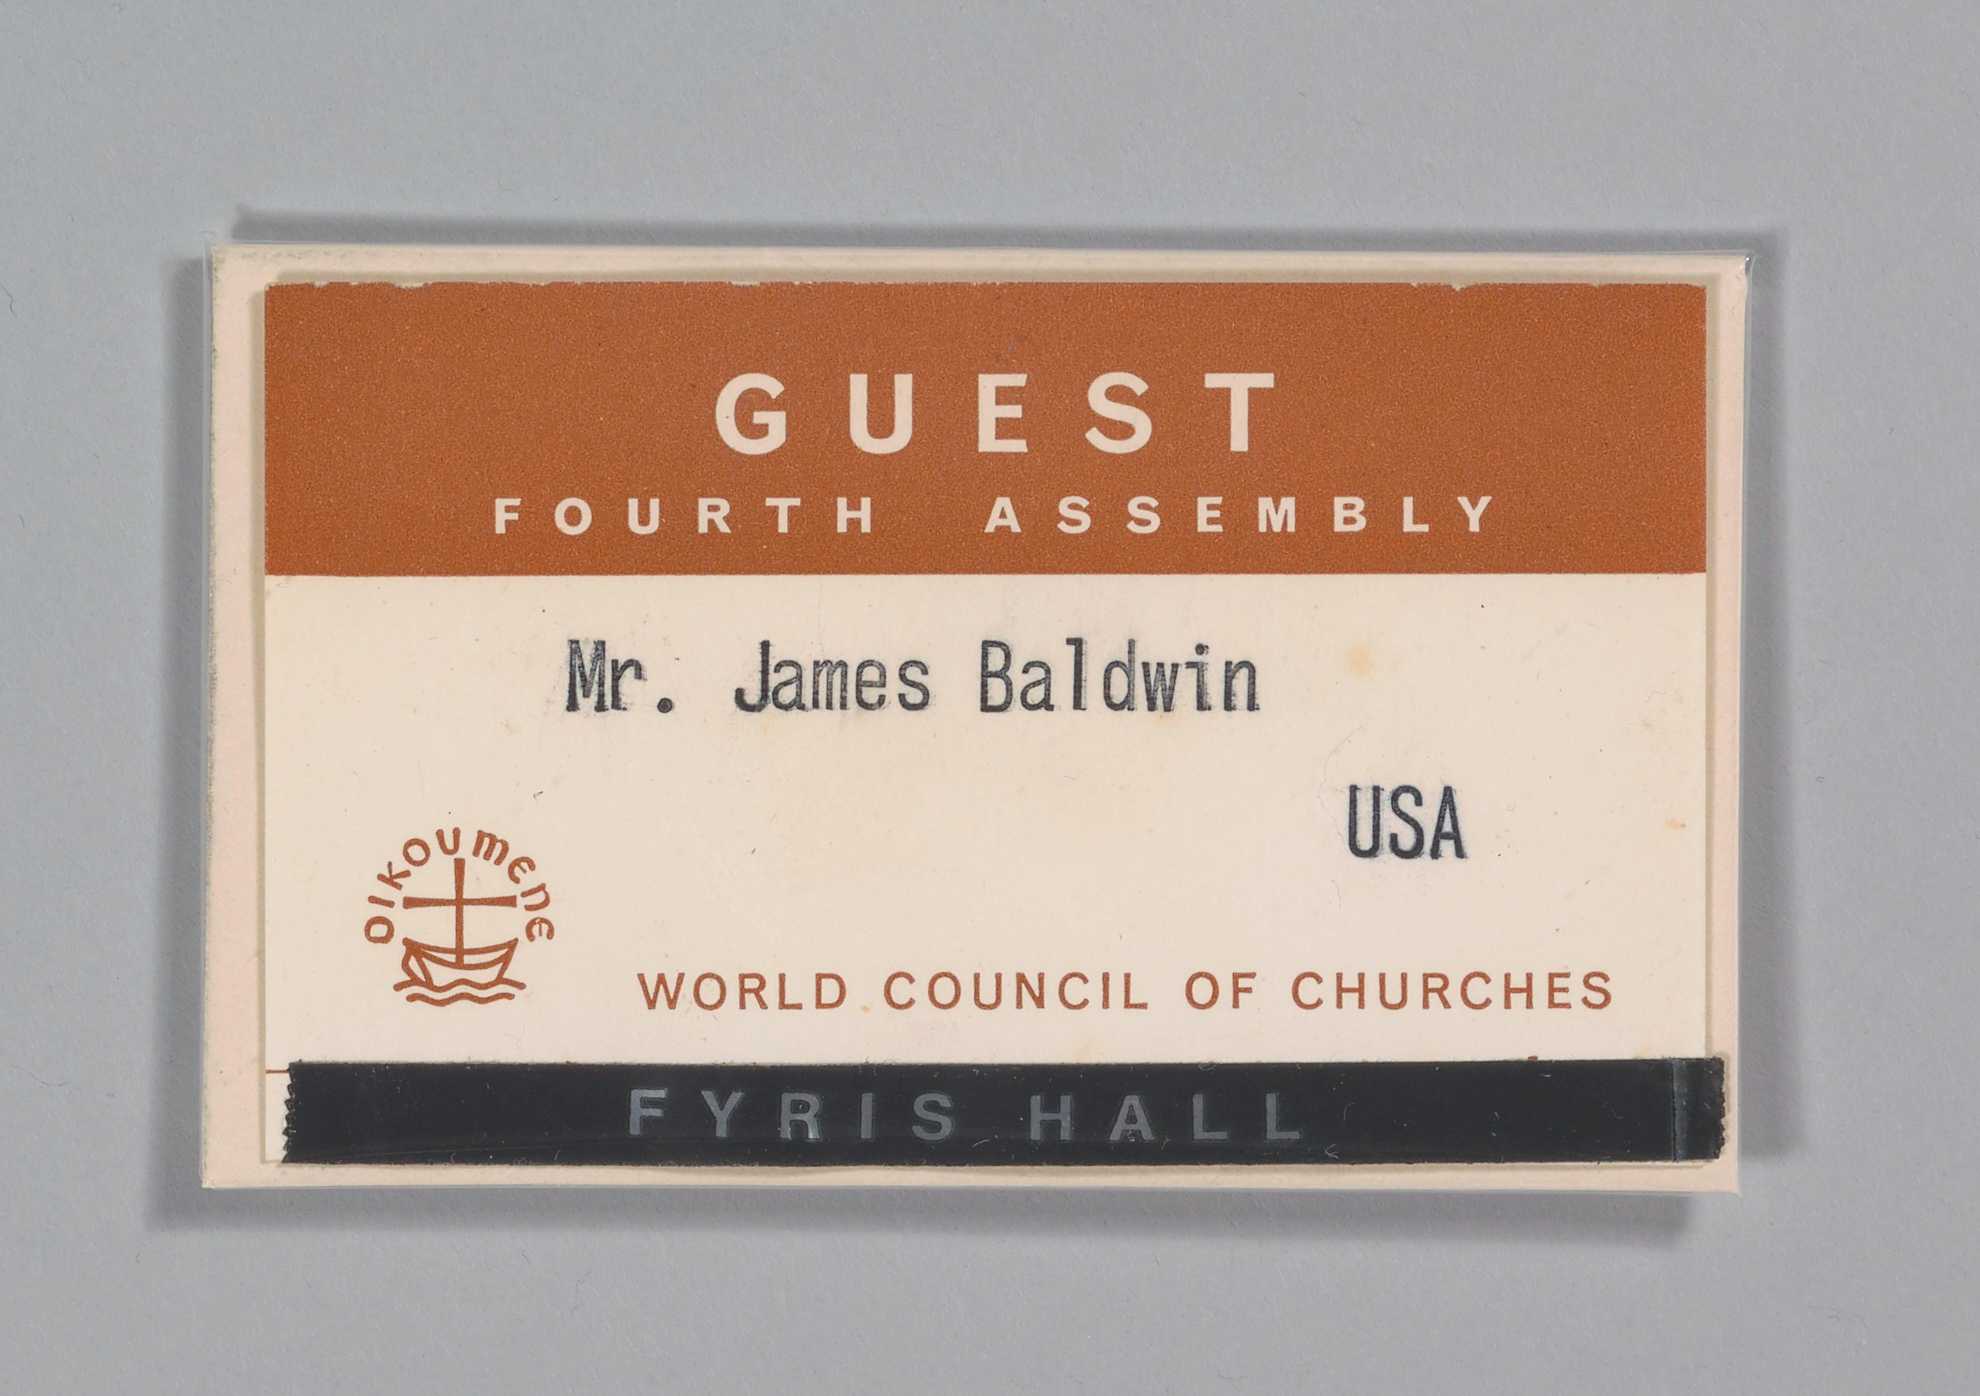 A guest badge for the 1968 World Council of Churches Fourth Assembly. James Baldwin's name is typed on the badge.